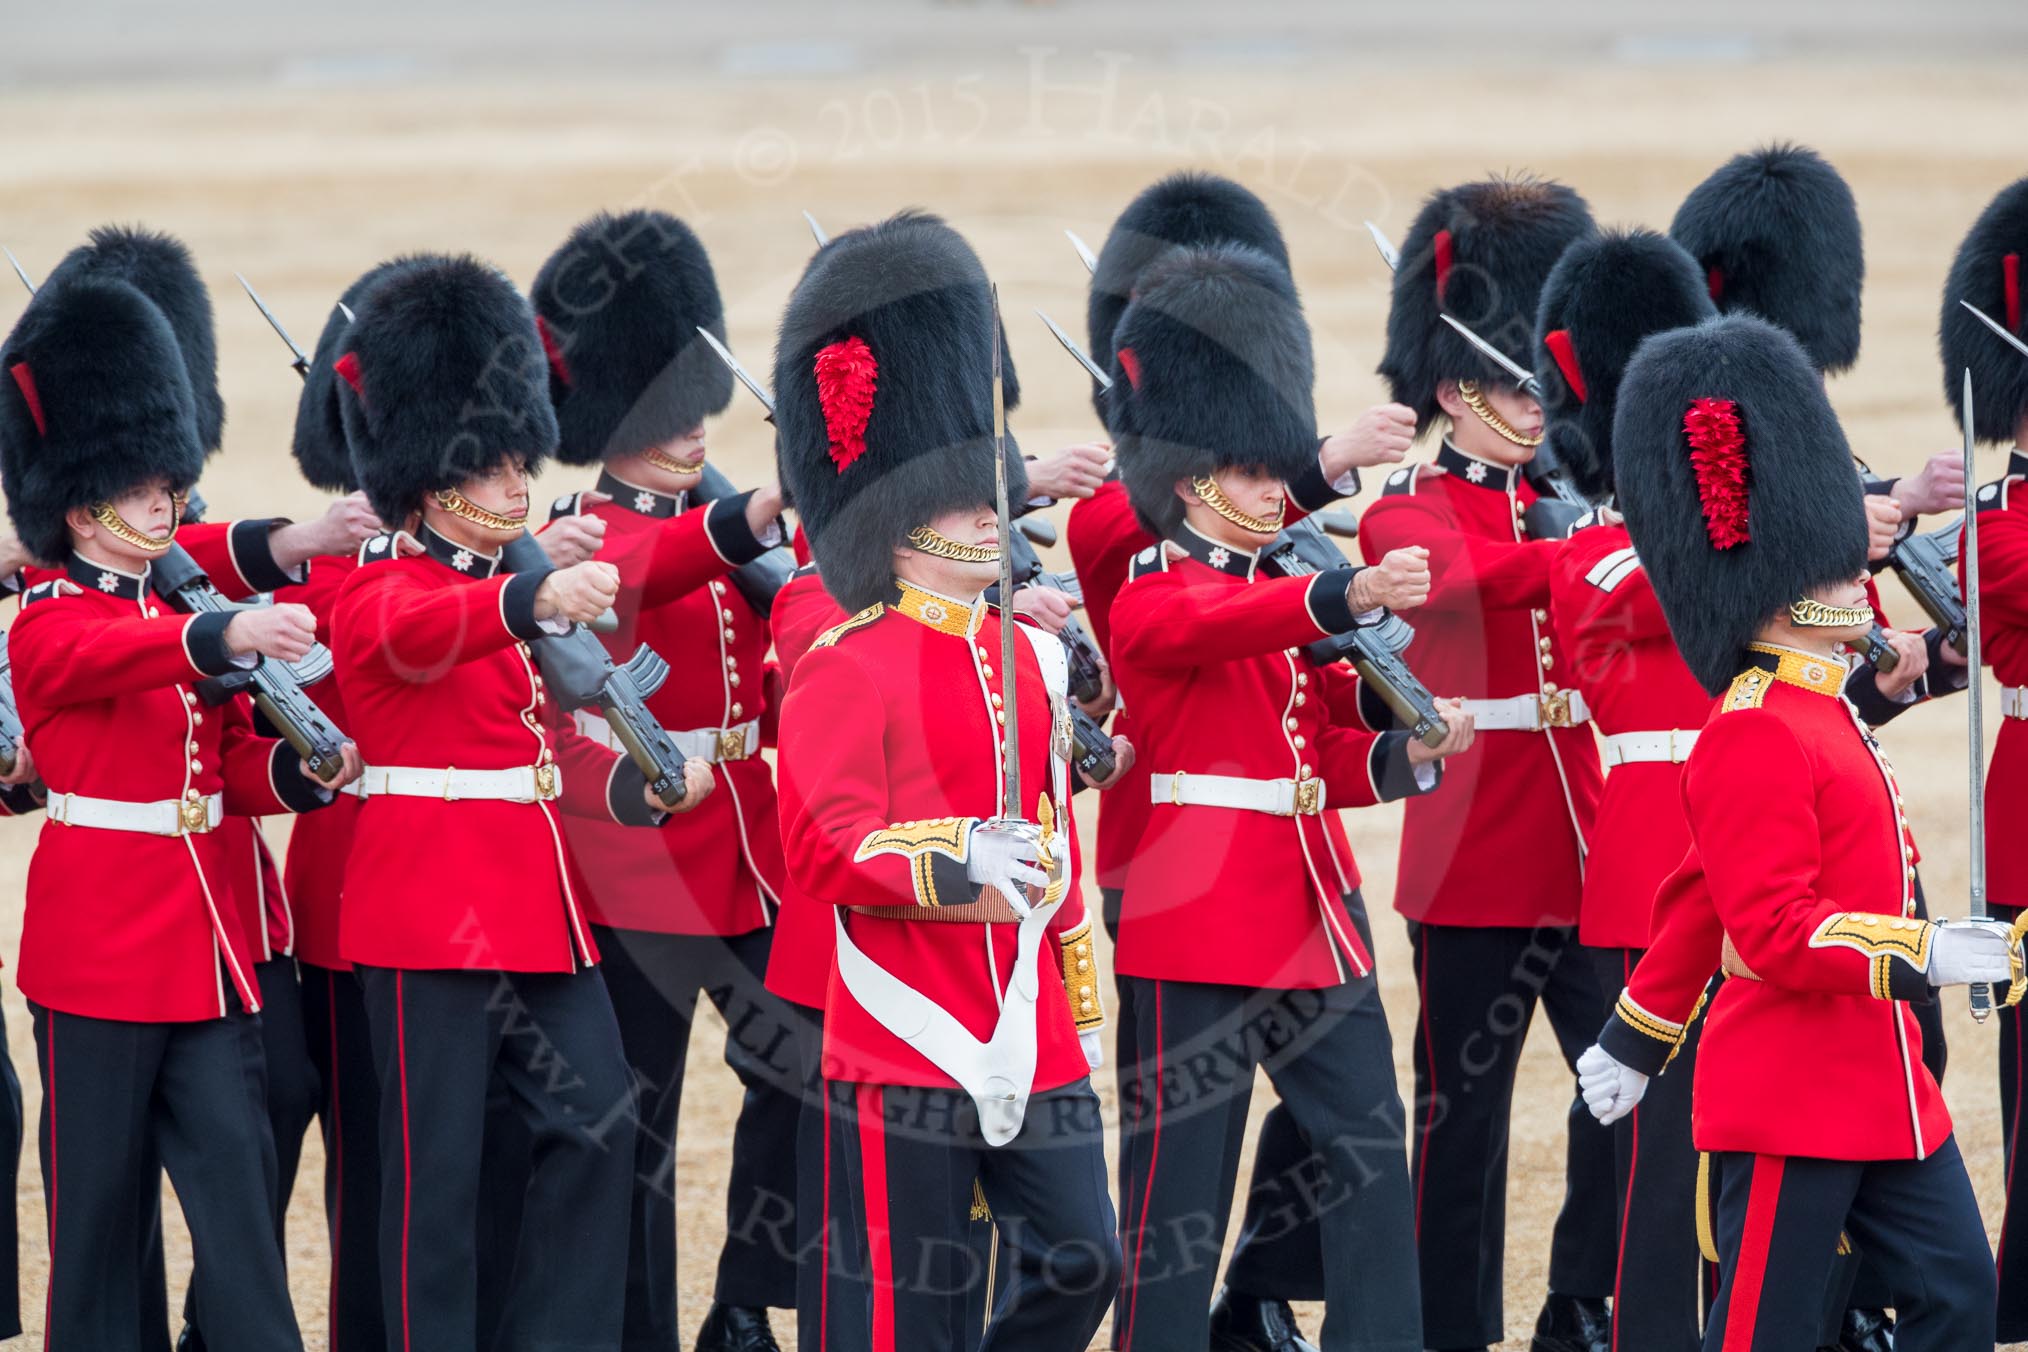 Trooping the Colour 2016.
Horse Guards Parade, Westminster,
London SW1A,
London,
United Kingdom,
on 11 June 2016 at 11:18, image #483